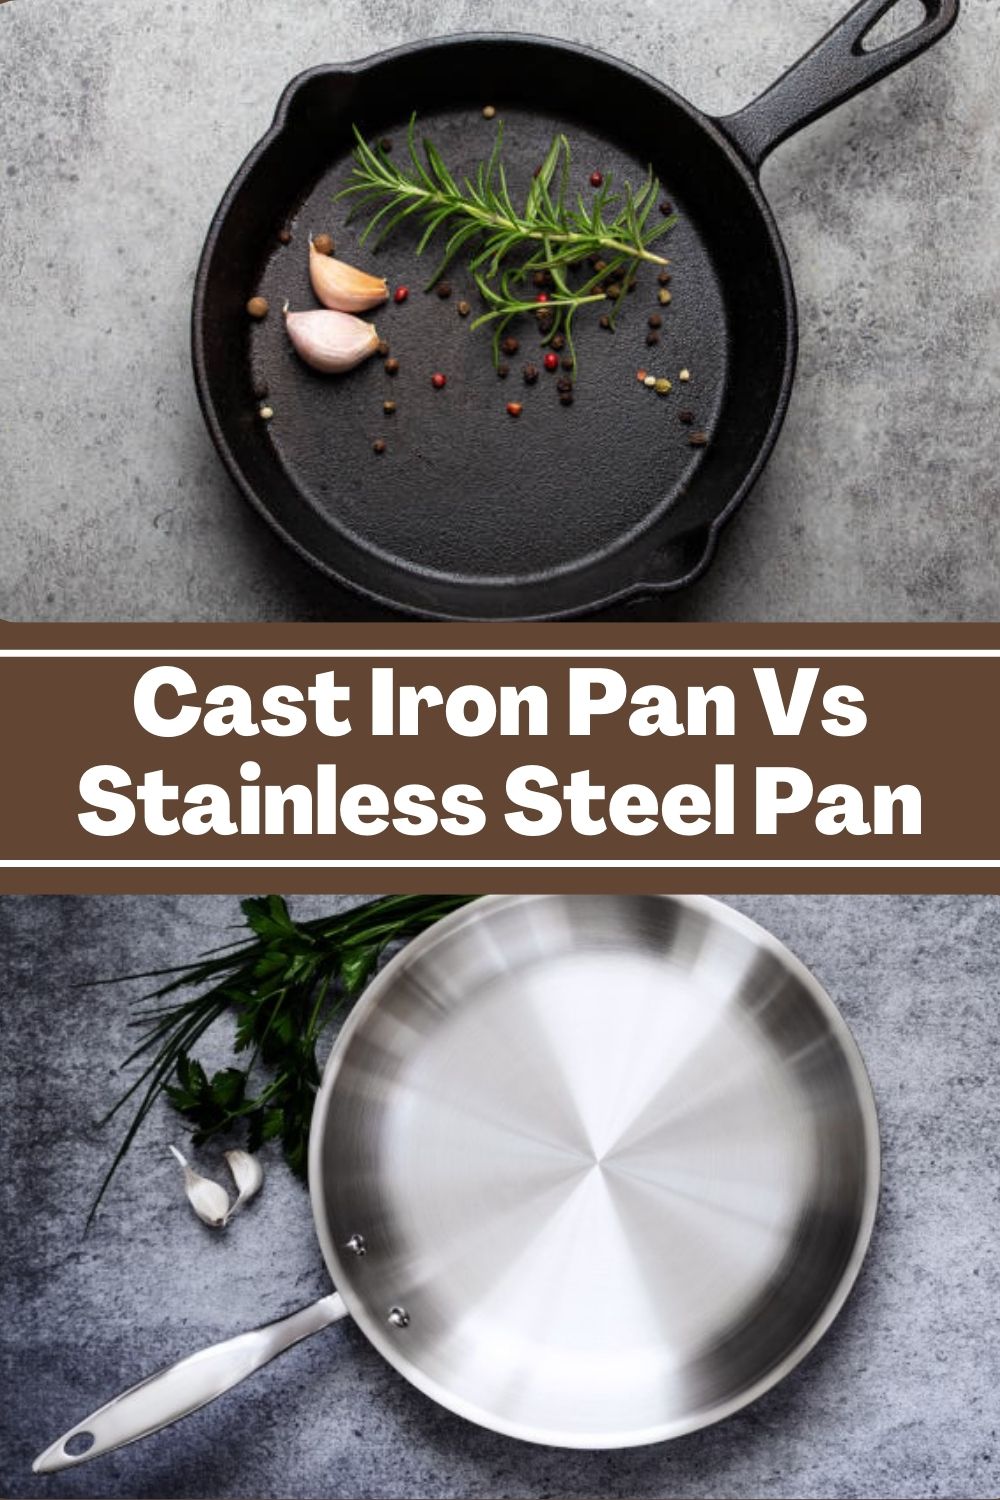 Cast Iron Vs Stainless Steel